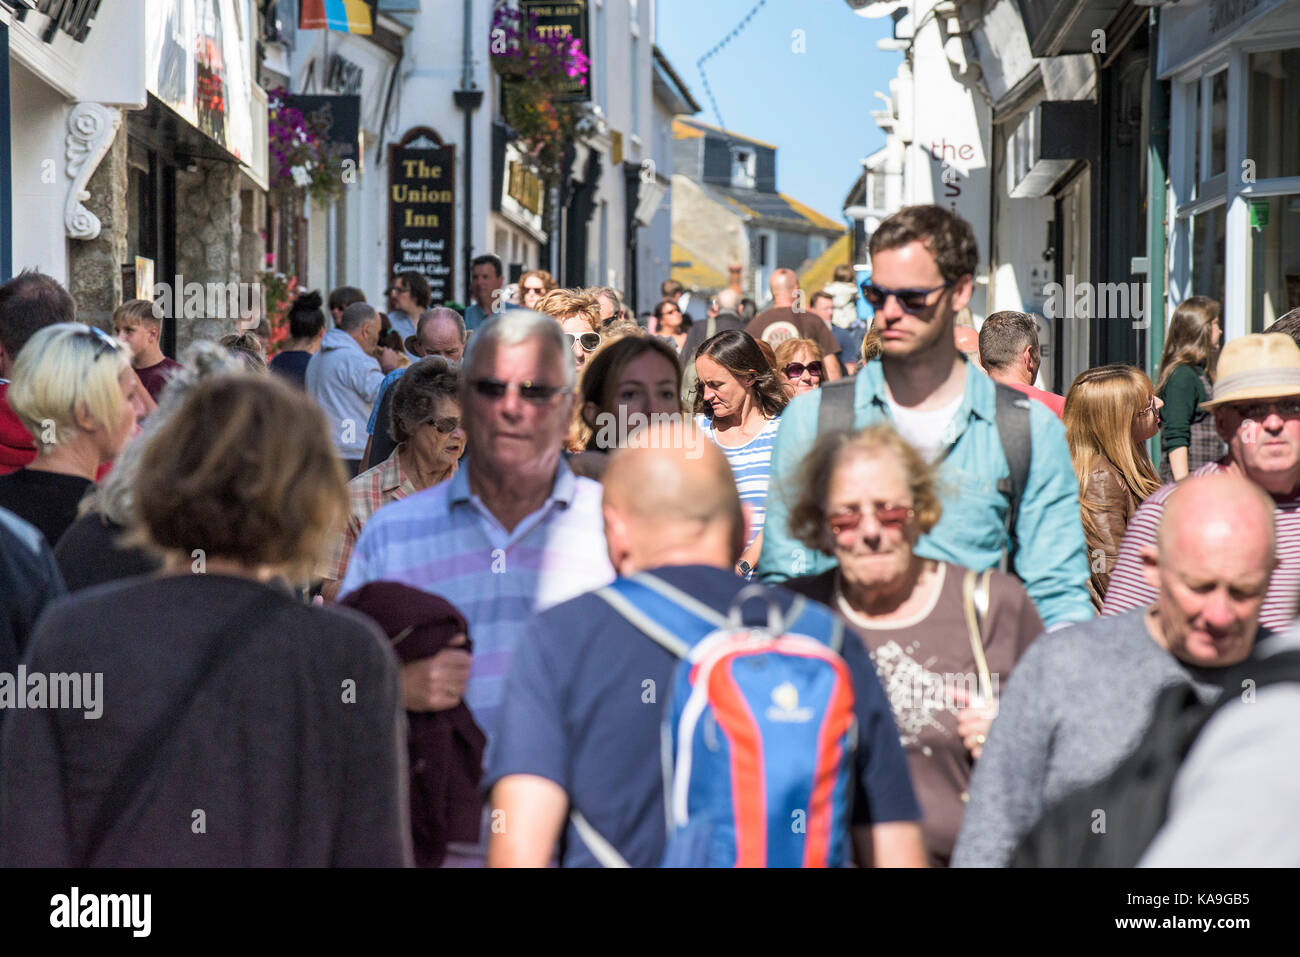 St Ives - a busy street scene in the picturesque St Ives town centre in Cornwall. Stock Photo